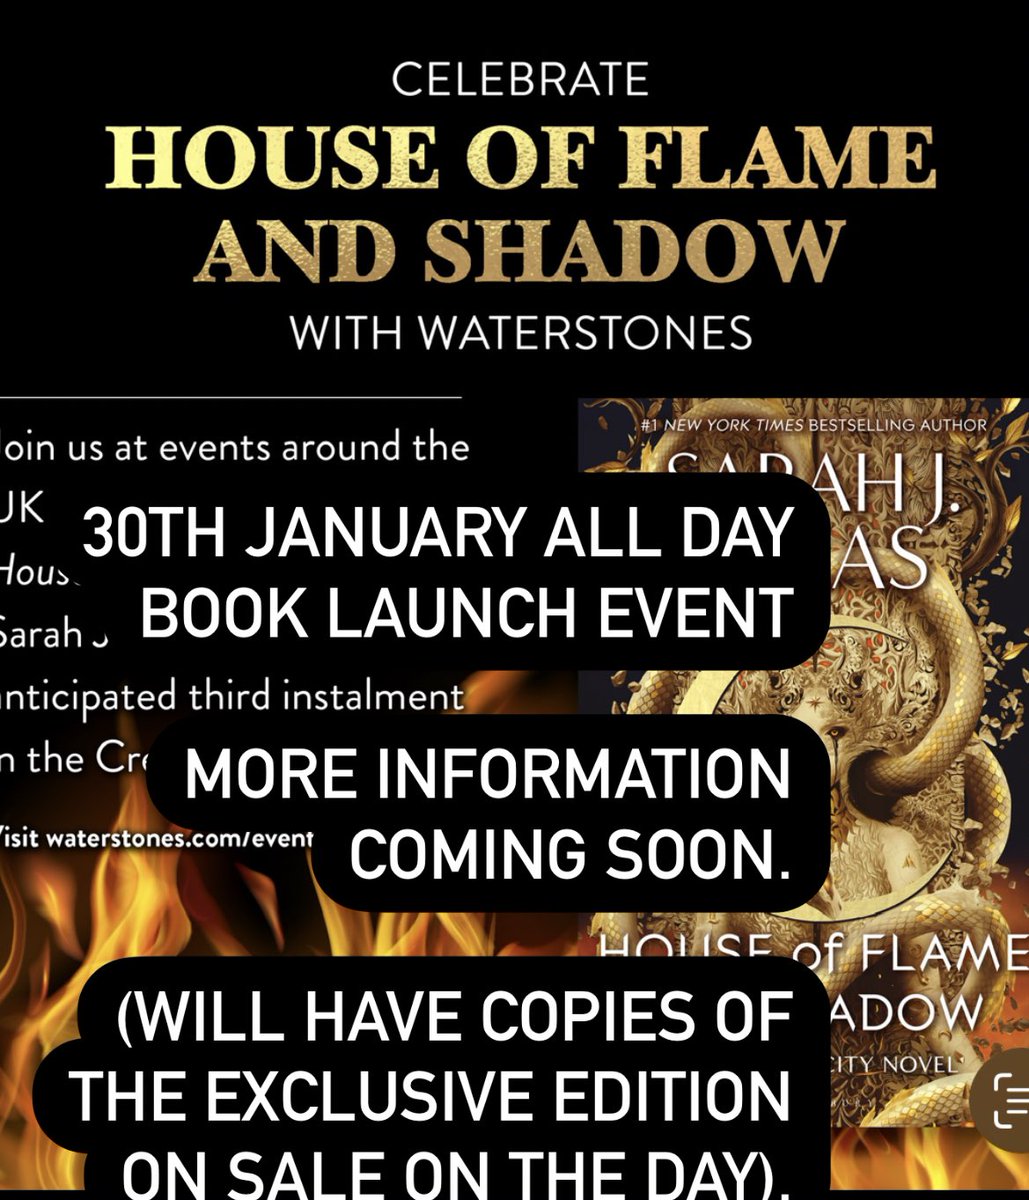 Calling all #sarahjmaas fans. Save the date, more information coming soon. #HouseOfFlameAndShadow